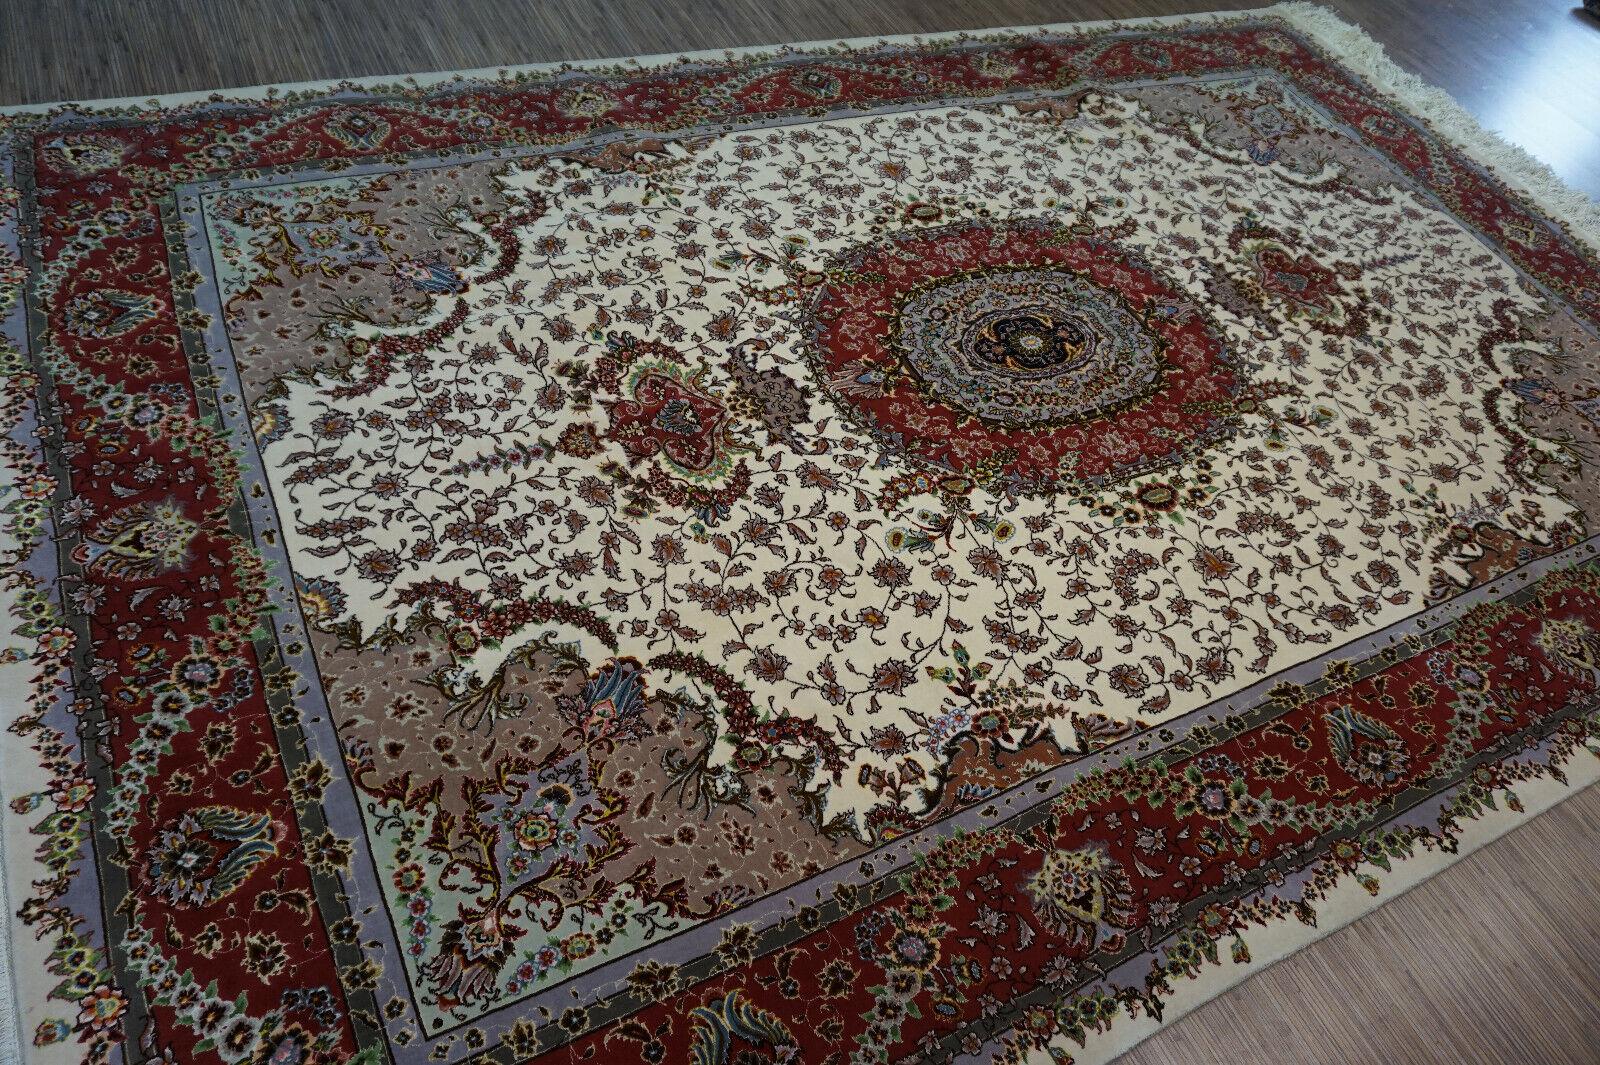 Late 20th Century Handmade Vintage Persian Style Tabriz Rug With Silk 6.5' x 10', 1980s - 1D63 For Sale